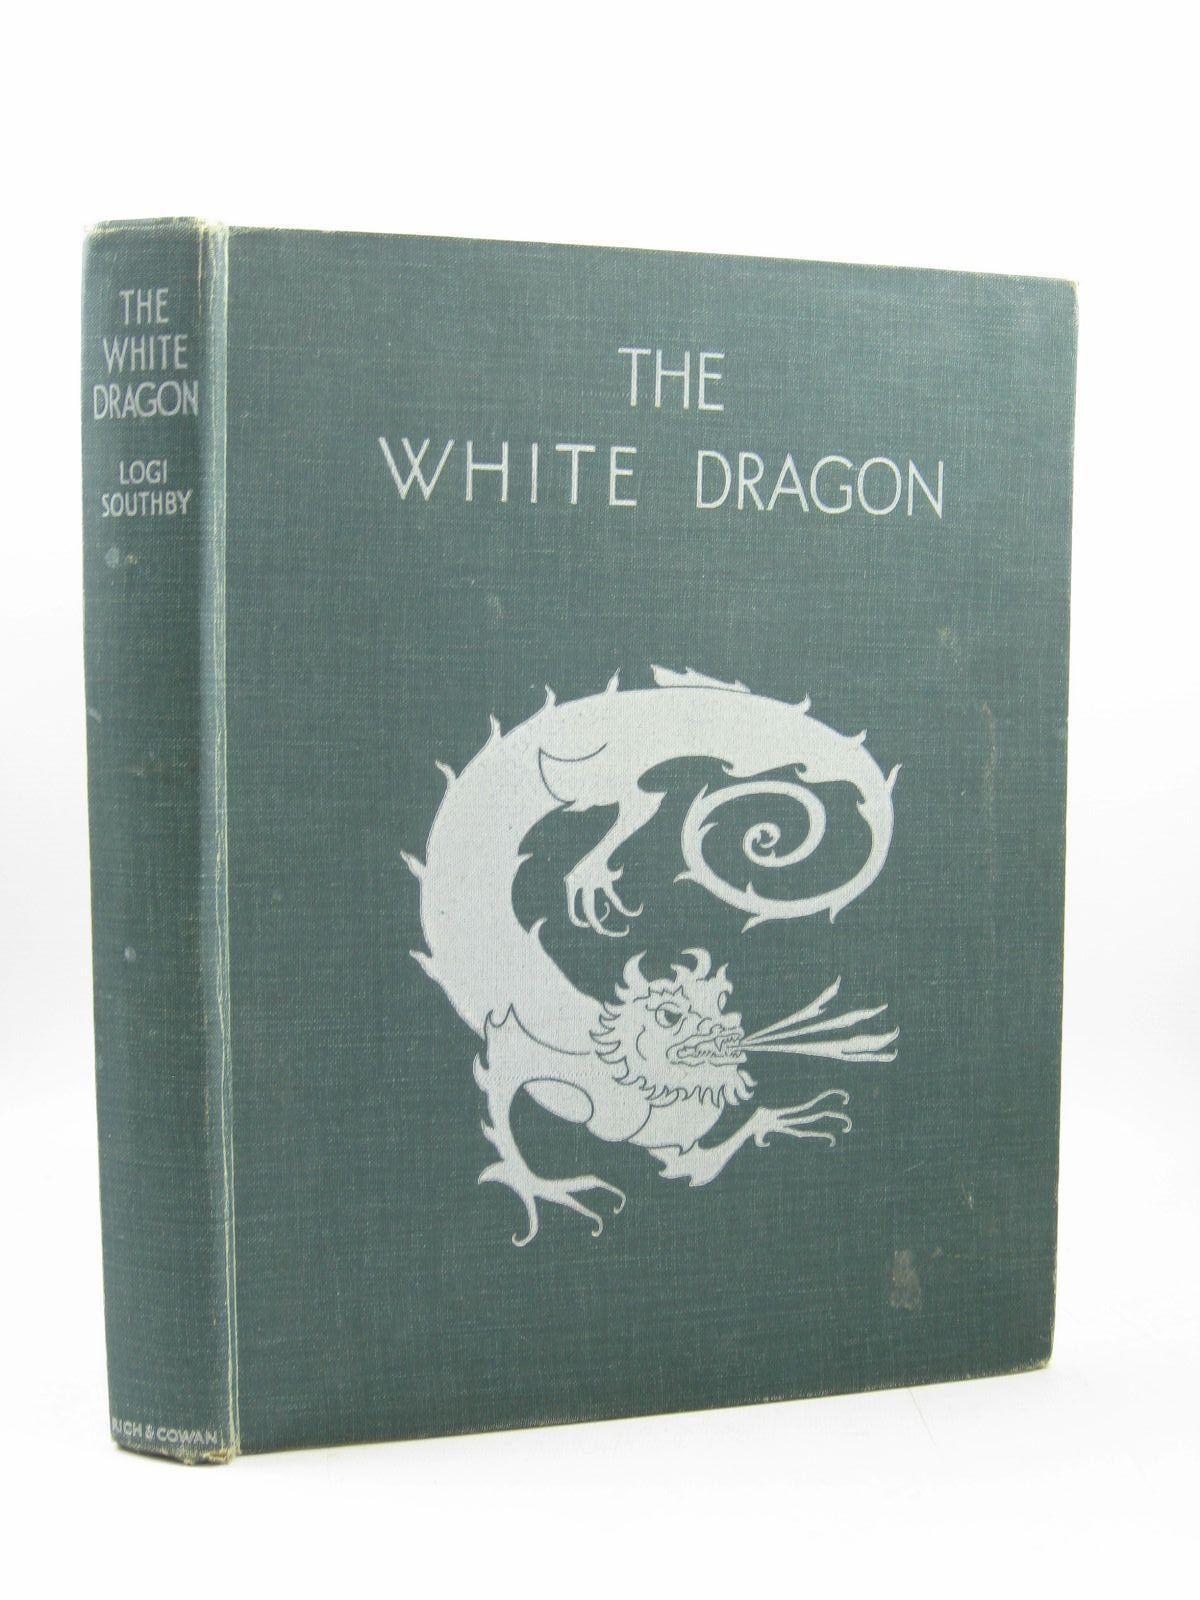 Photo of THE WHITE DRAGON written by Southby, Logi illustrated by Southby, Logi published by Rich &amp; Cowan Ltd. (STOCK CODE: 1314095)  for sale by Stella & Rose's Books